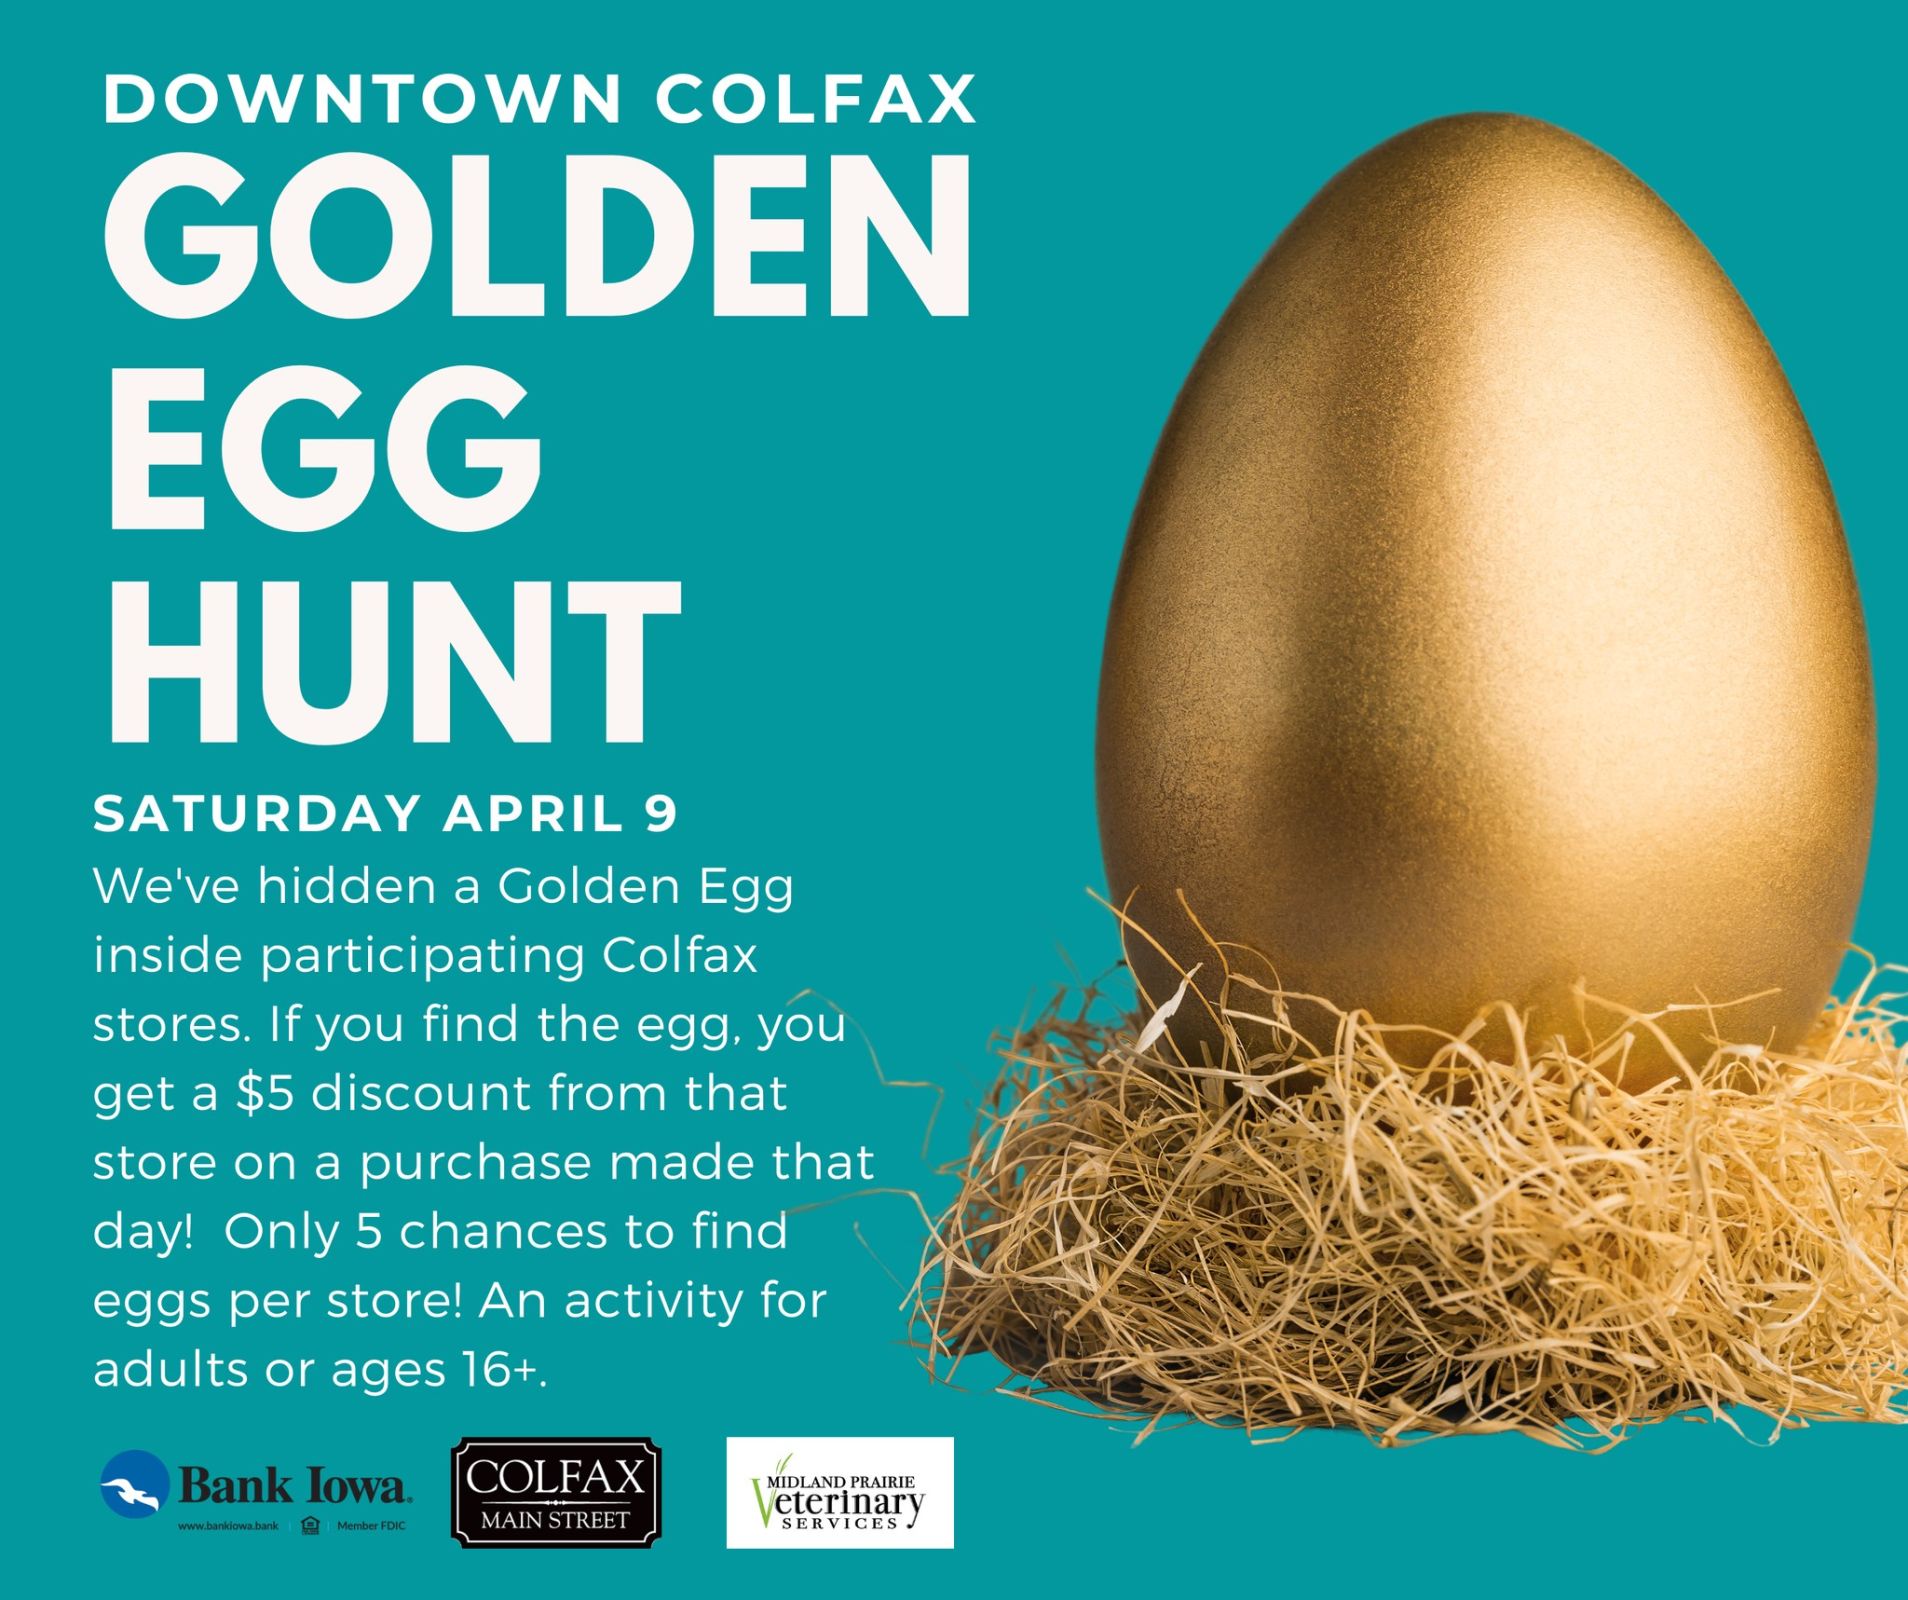 Event Promo Photo For Downtown Colfax Golden Egg Hunt For Adults